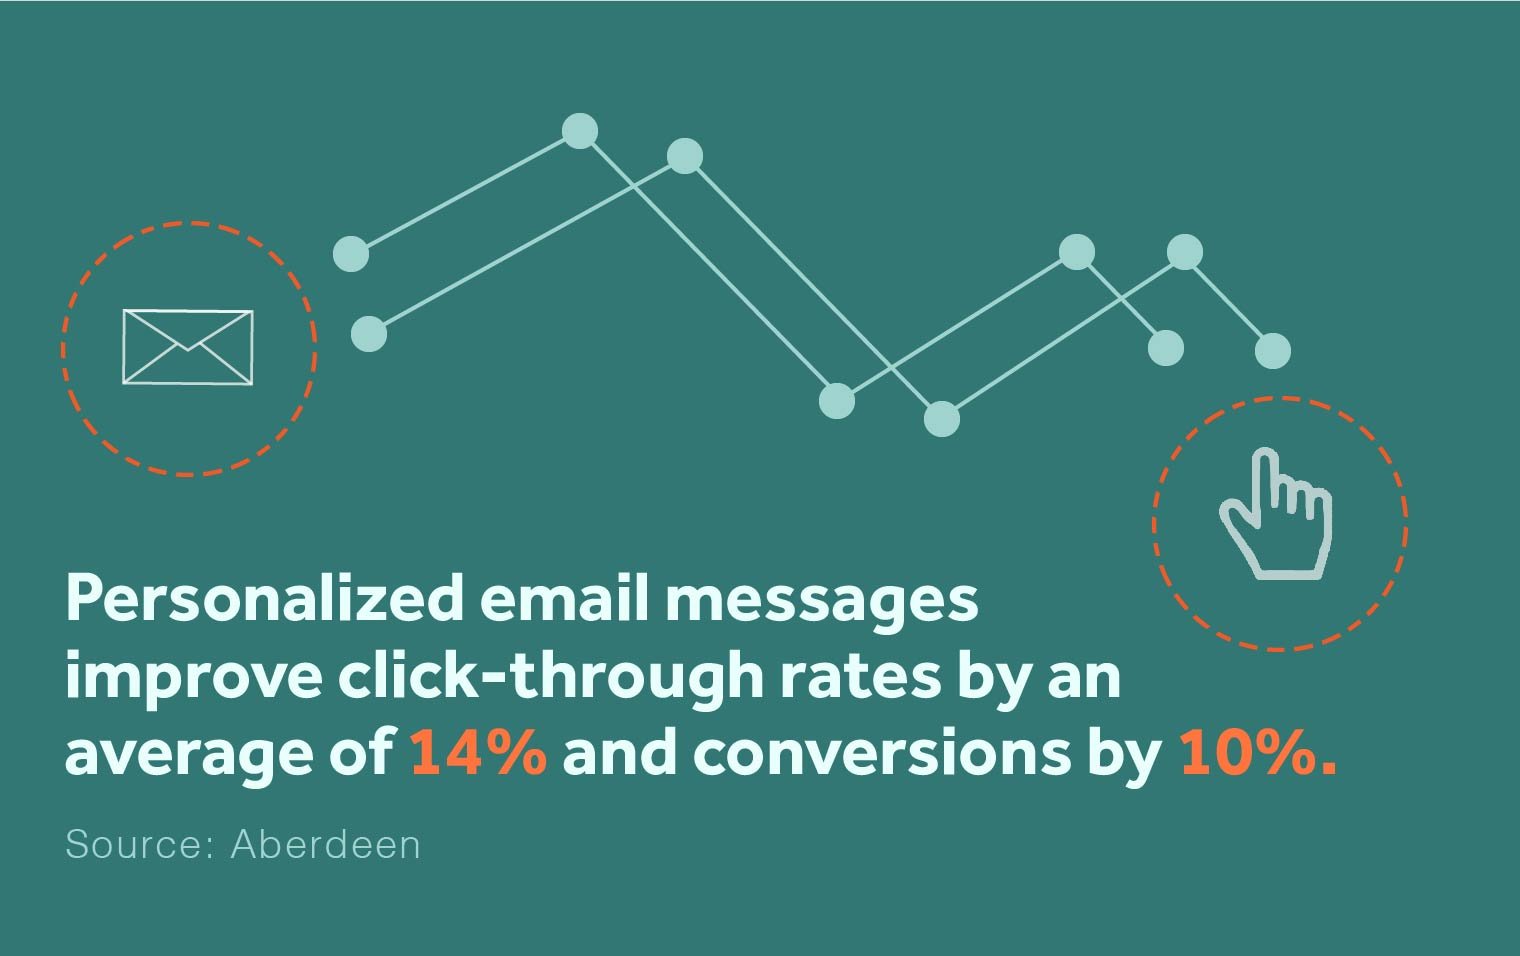 Personalized email messages improve click-through rates by an average of 14% and conversions by 10%.